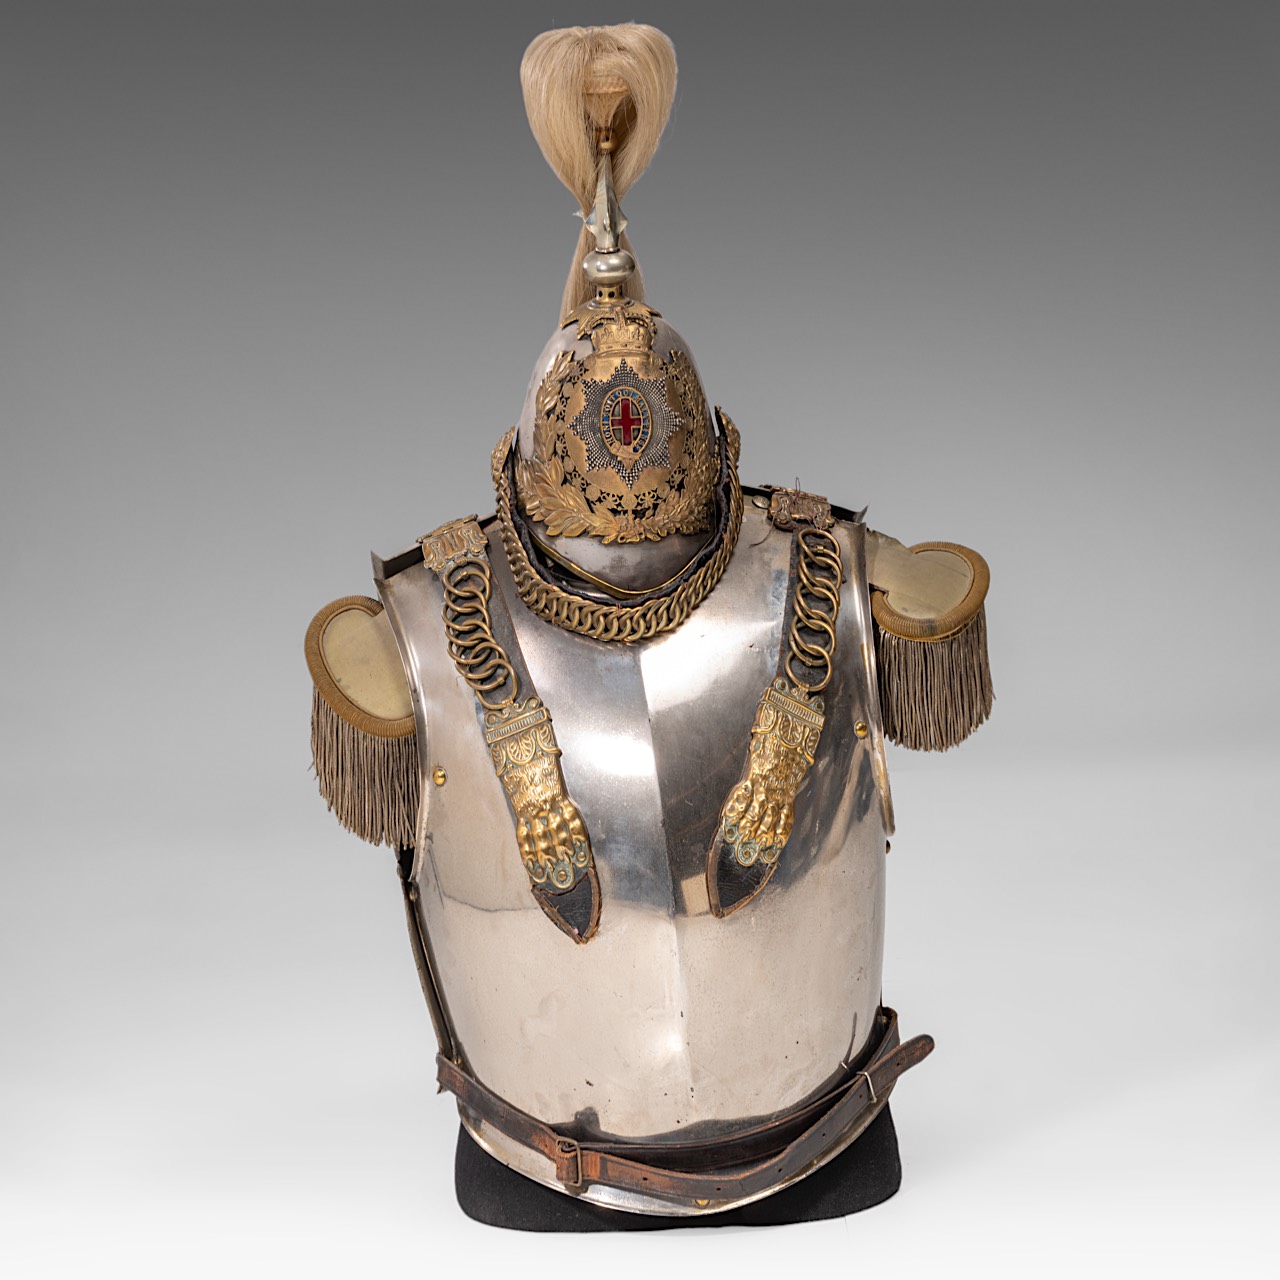 Cuirass and helmet of the Royal Horse Guards, metal and brass, Queen Victoria (1837-1901) - Image 2 of 8